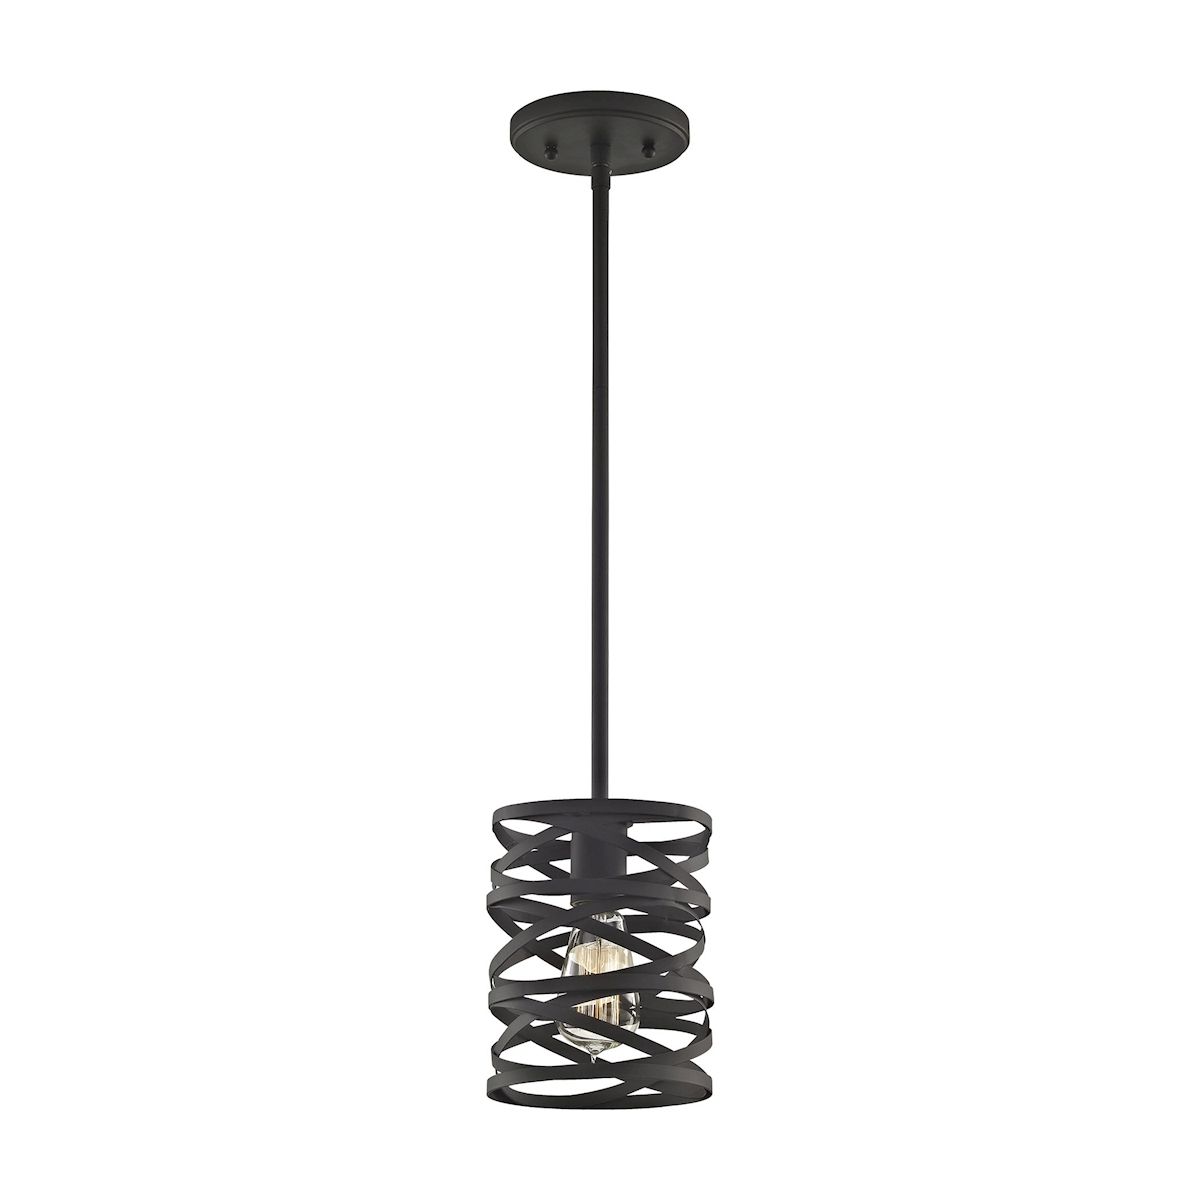 Textured Glass And Oil Rubbed Bronze Metal Pendant Lights Inside Newest Vorticy 1 Light Mini Pendant In Oil Rubbed Bronze With (View 4 of 20)